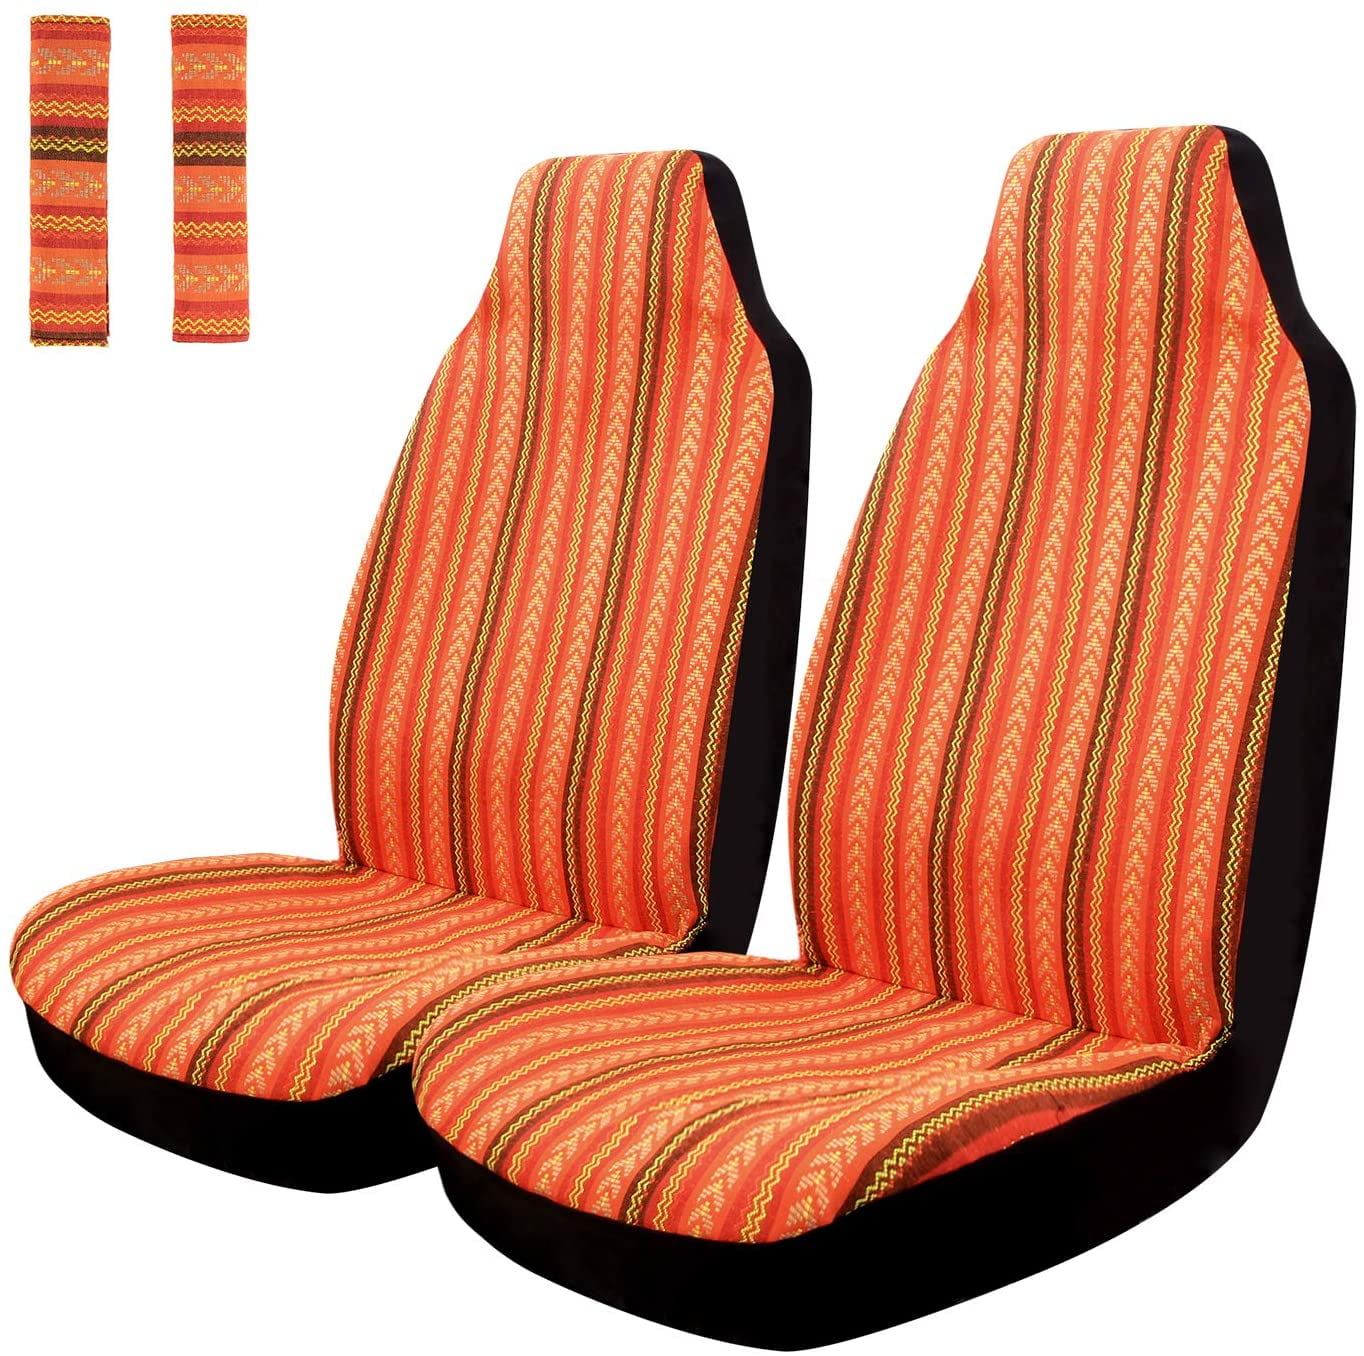 SUV & Truck Color 8, Front Set Copap Seat Covers Universal Baja Bucket Seat Cover Stripe Colorful Saddle Blanket for Car